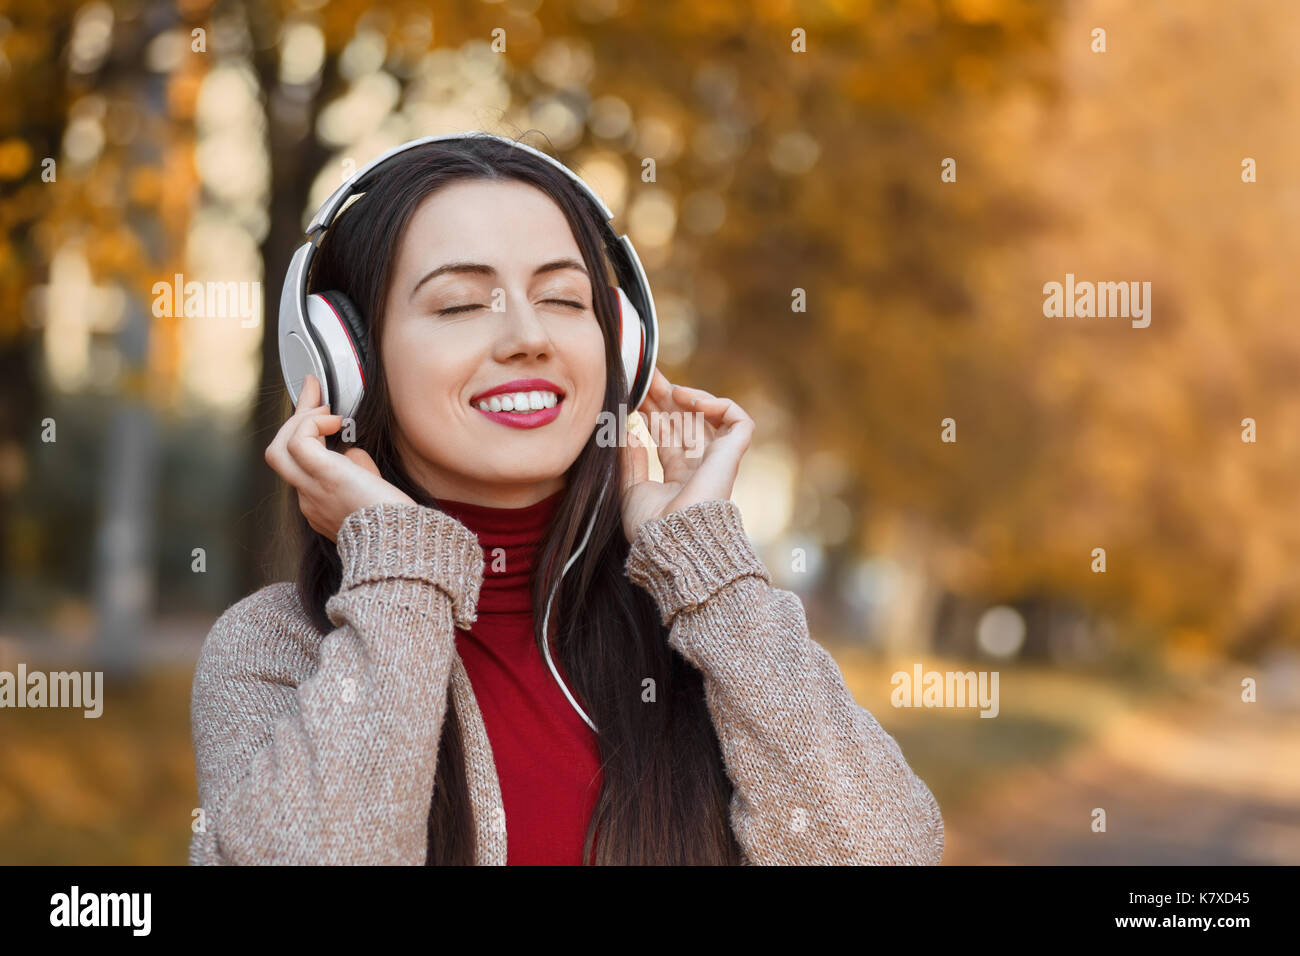 young smiling woman in headphones with closed eyes outdoors on autumn day. Girl listening music in park. Girl enjoys music. Autumn portrait Stock Photo